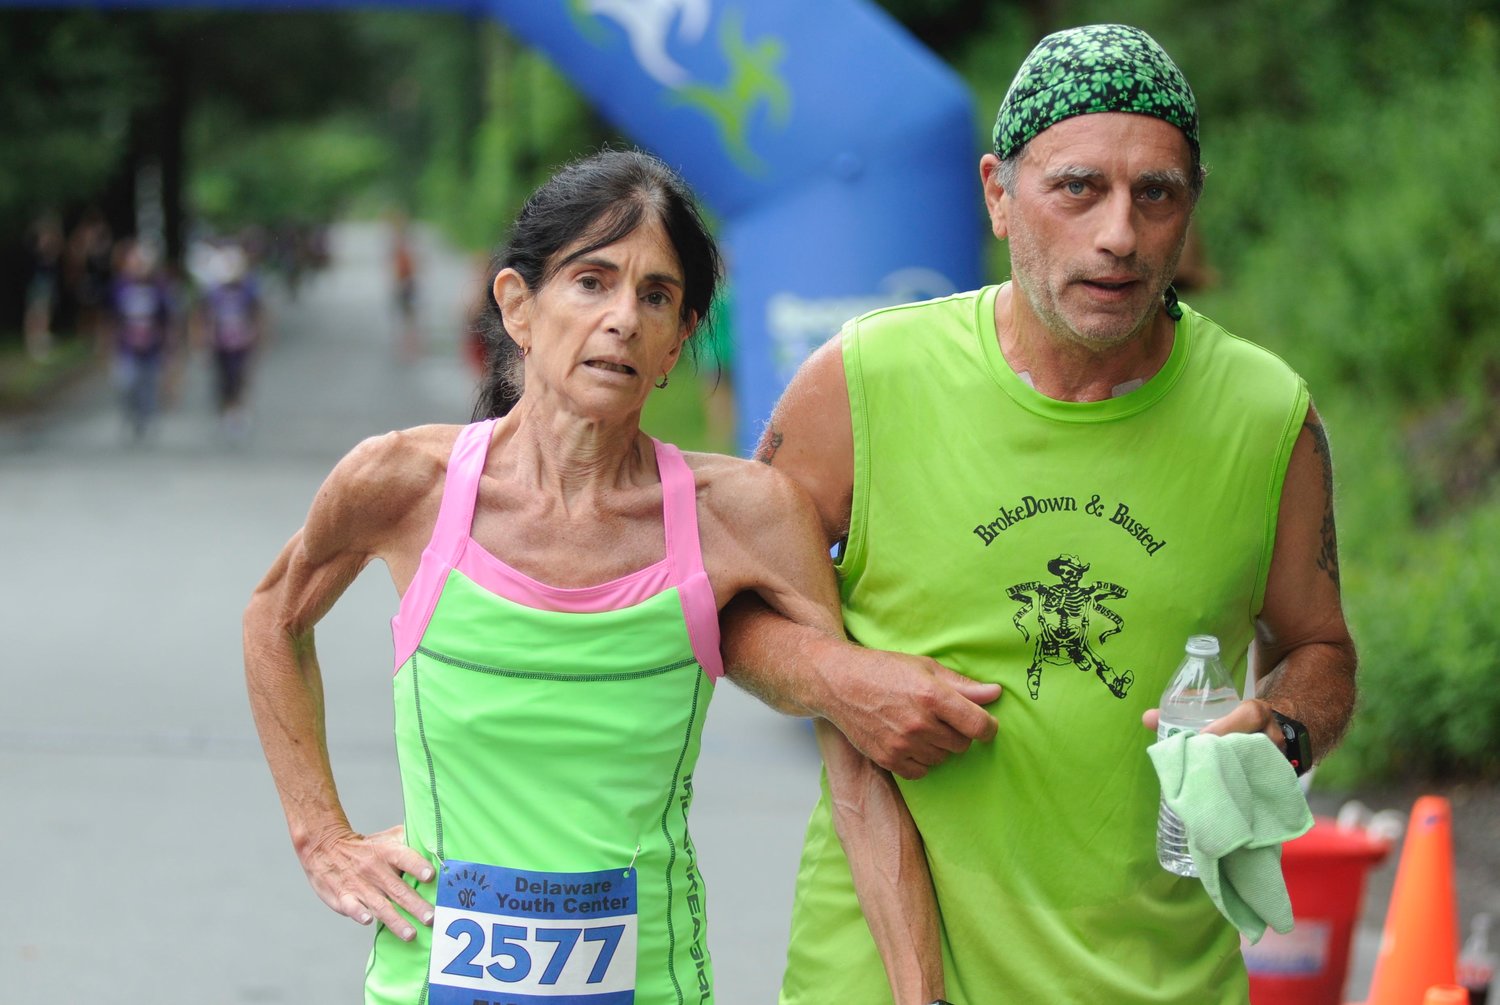 Nothing left in the tank. Marian and James Harrison of Forestburgh, NY gave it everything they had in the 5K run to finish running on fumes. She came in 20th at 28:30 in the female division; he took 23rd in male division at 26:06.